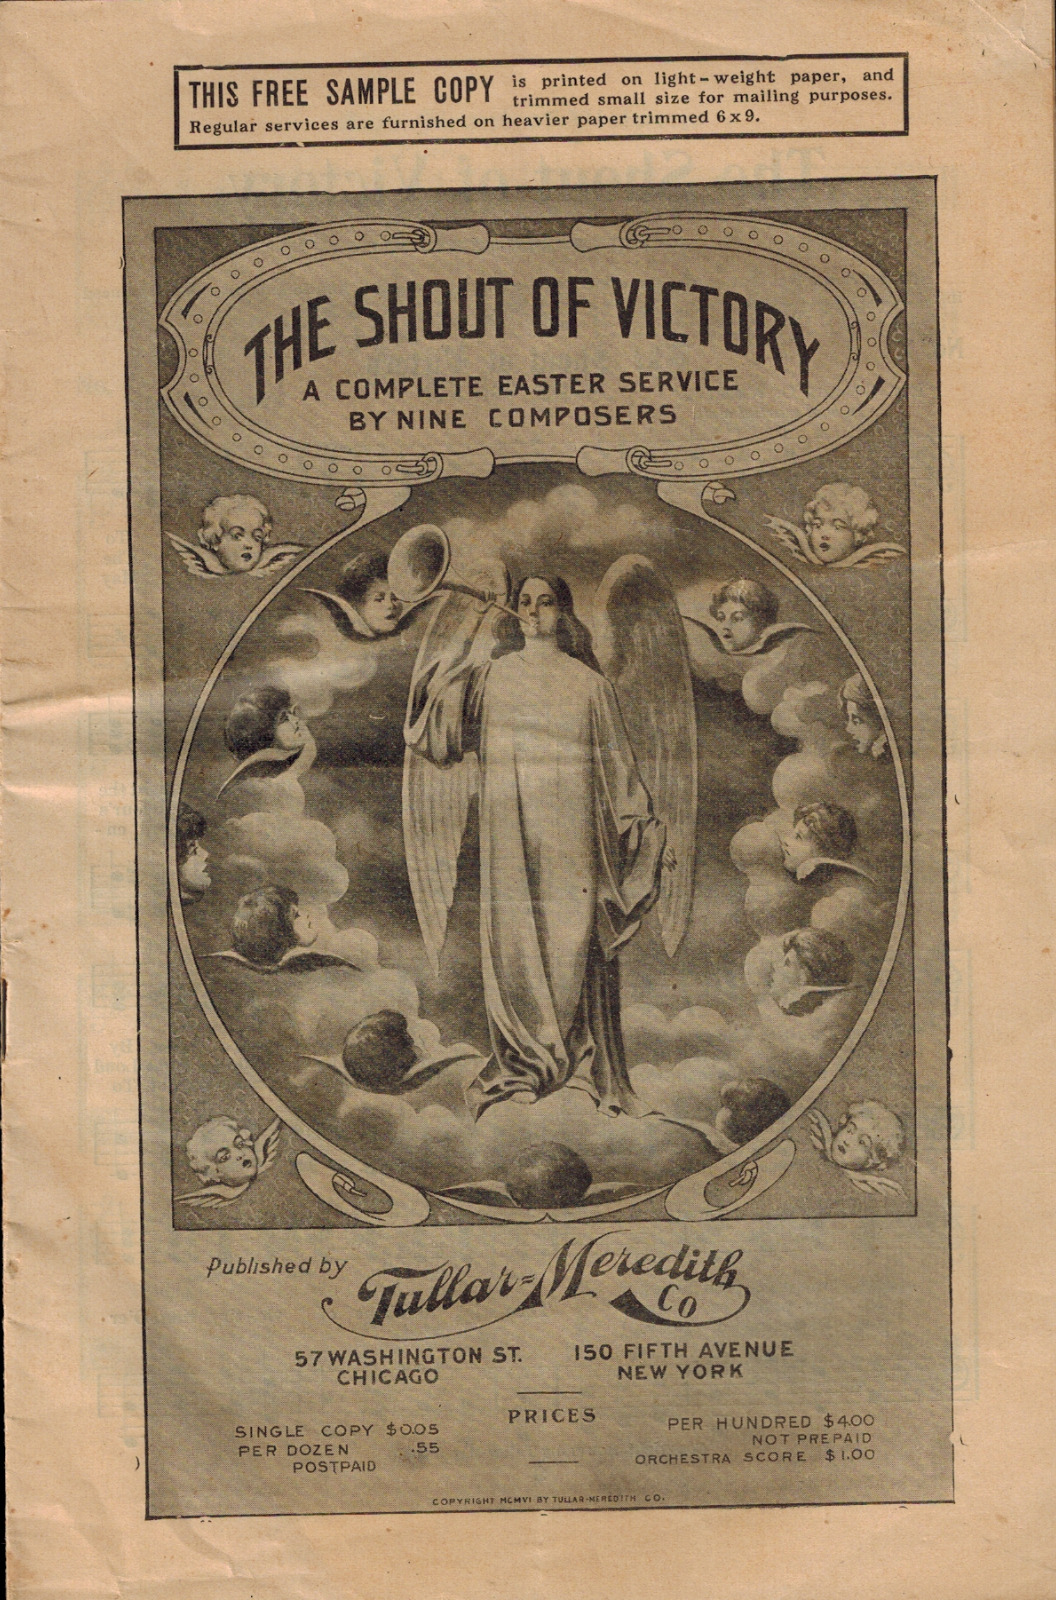 RARE 1906 The Shout of Victory A Complete Easter Service Hymns by Nine Composers